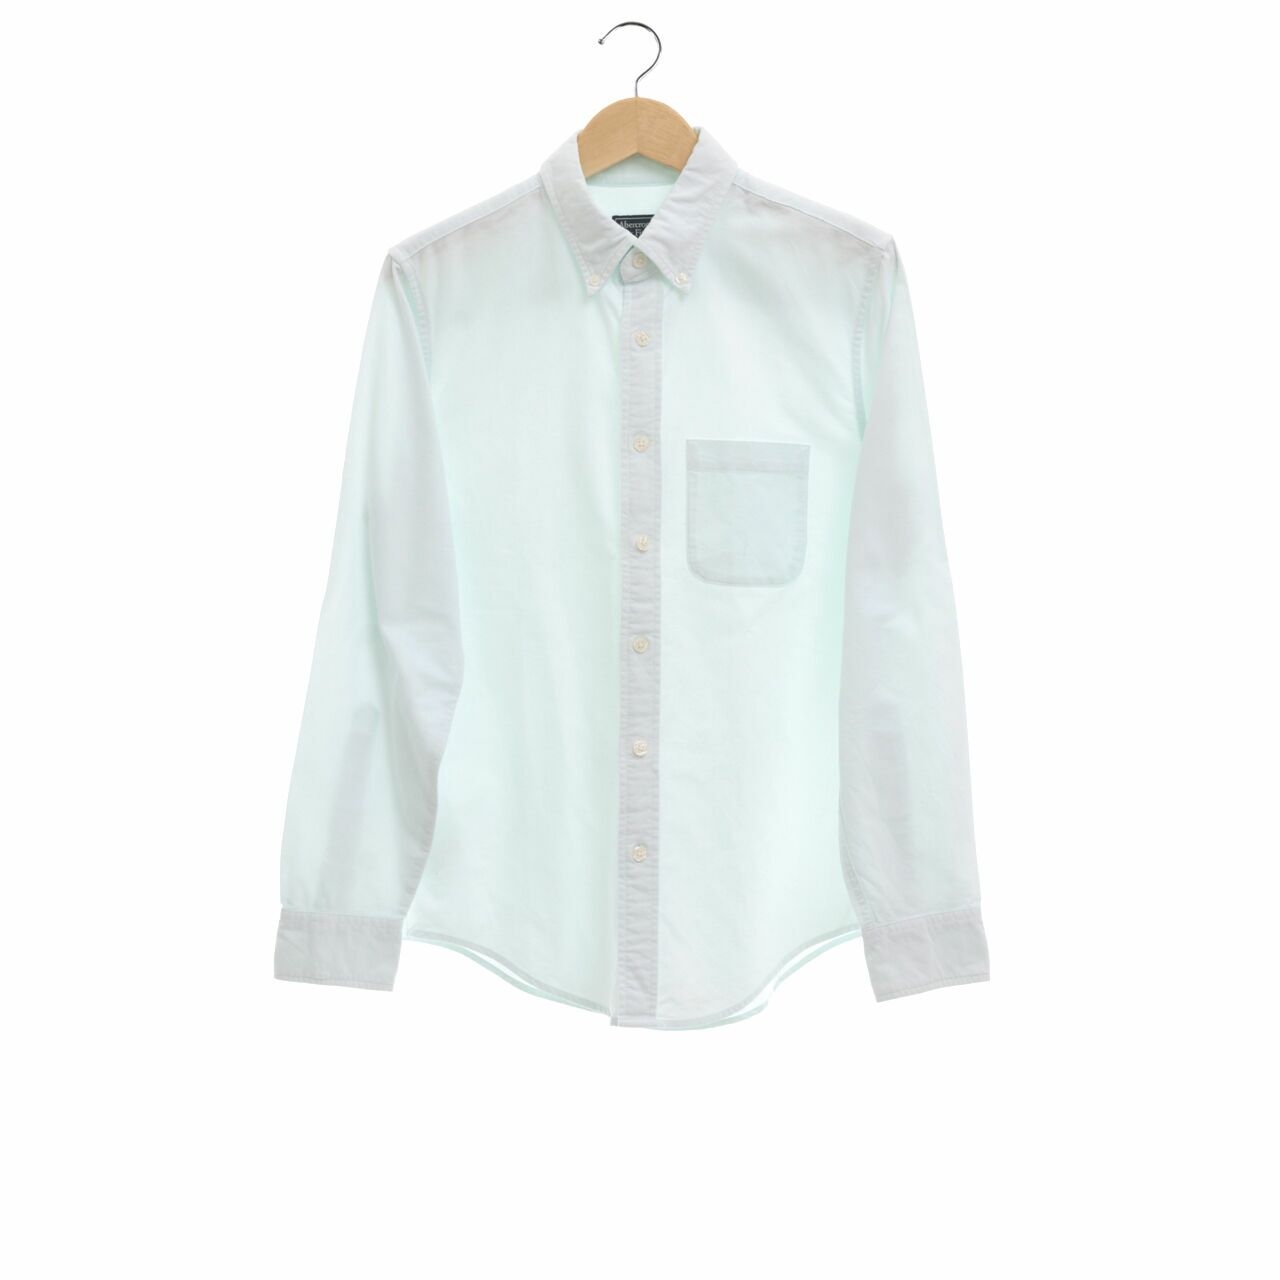 Abercrombie & Fitch Mint Long Sleeve Shirt